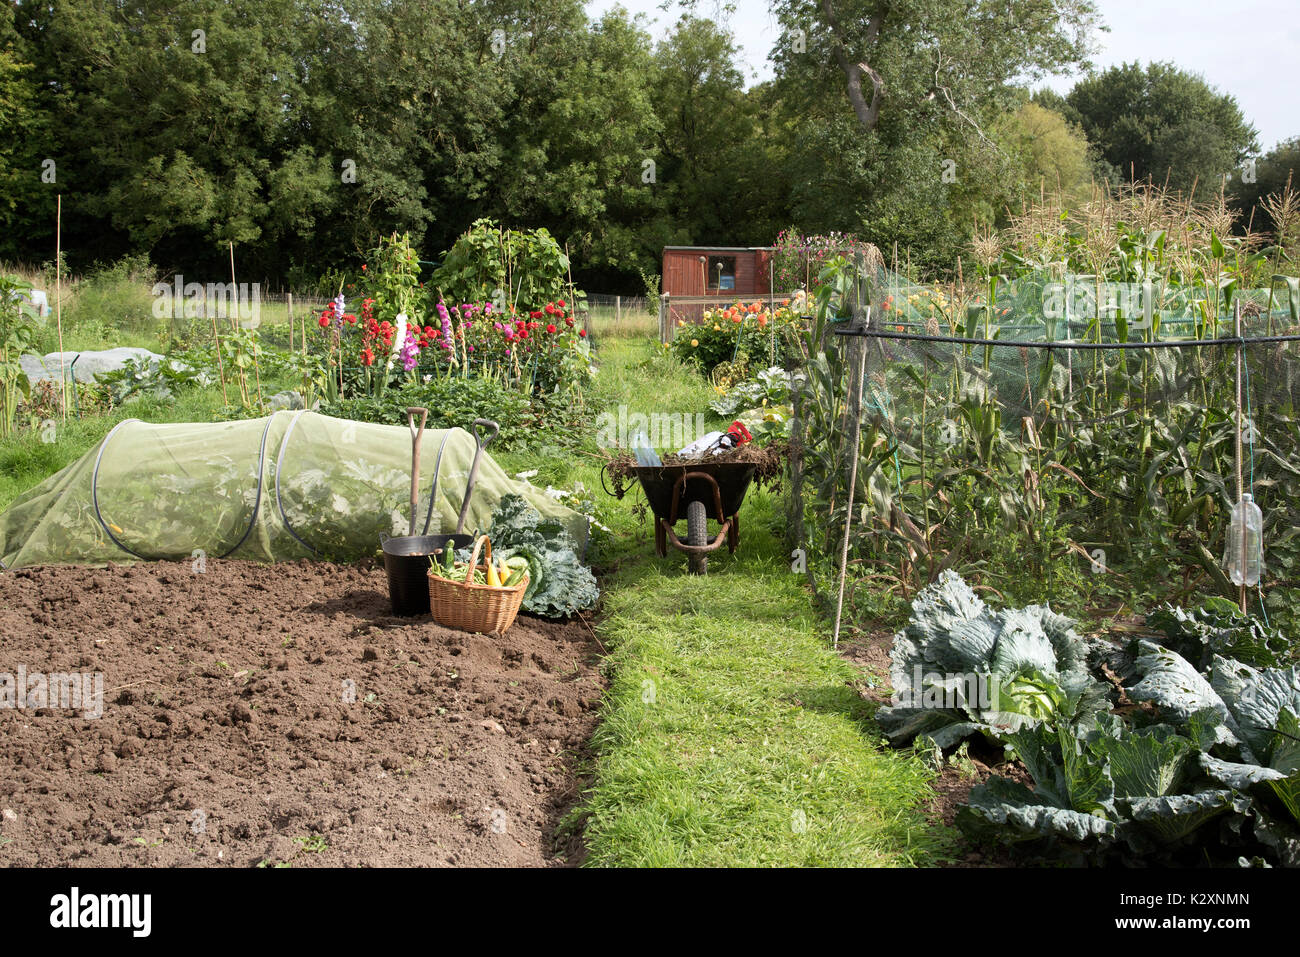 Landscape view of an allotment with flowers and vegetables growing. England UK Stock Photo